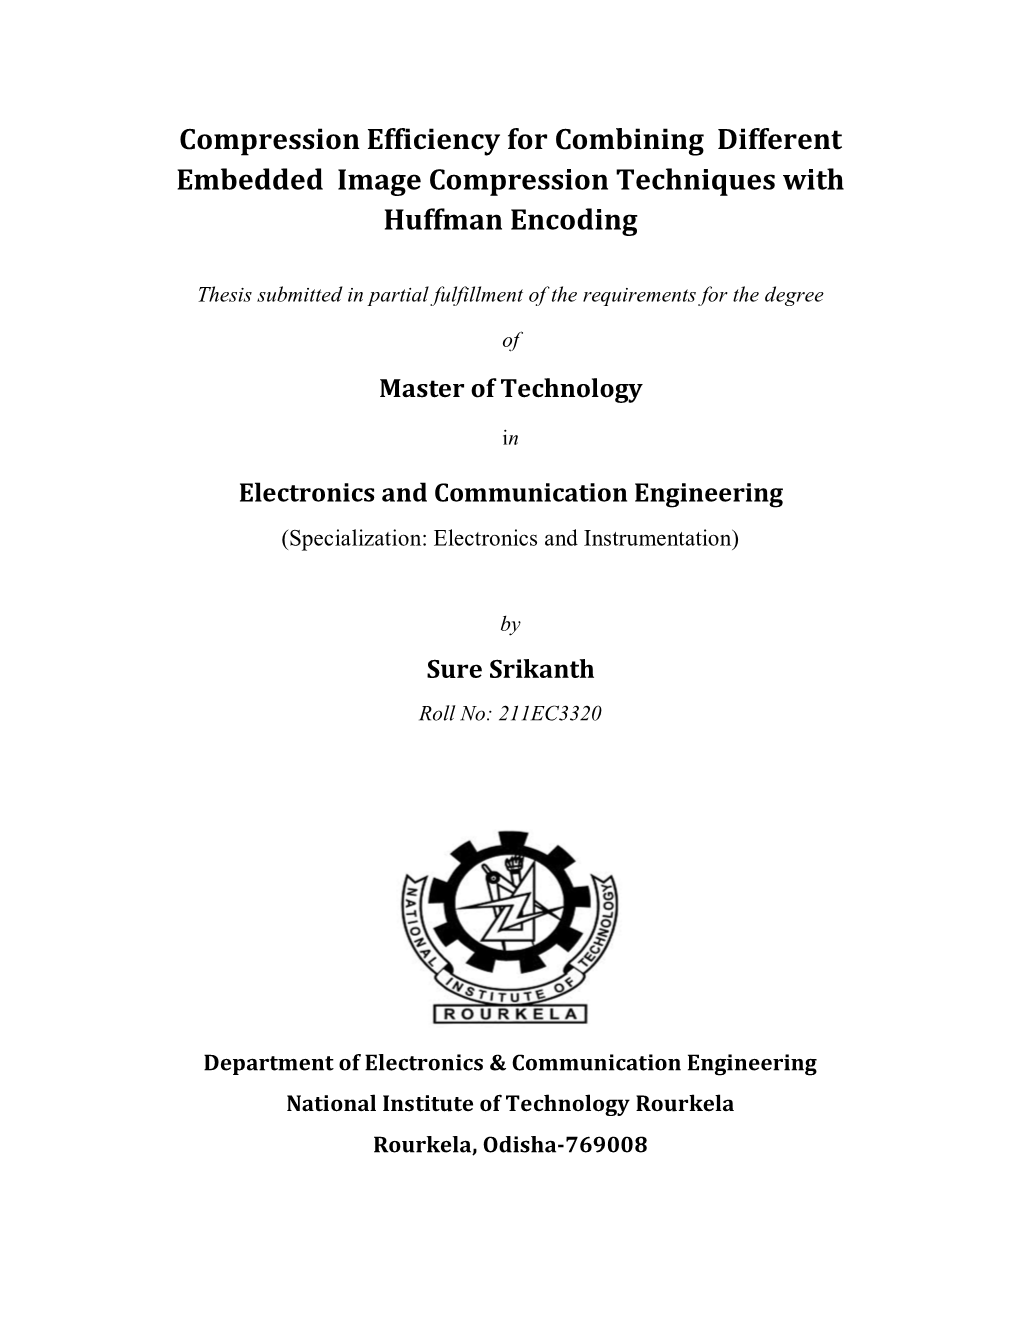 Compression Efficiency for Combining Different Embedded Image Compression Techniques with Huffman Encoding